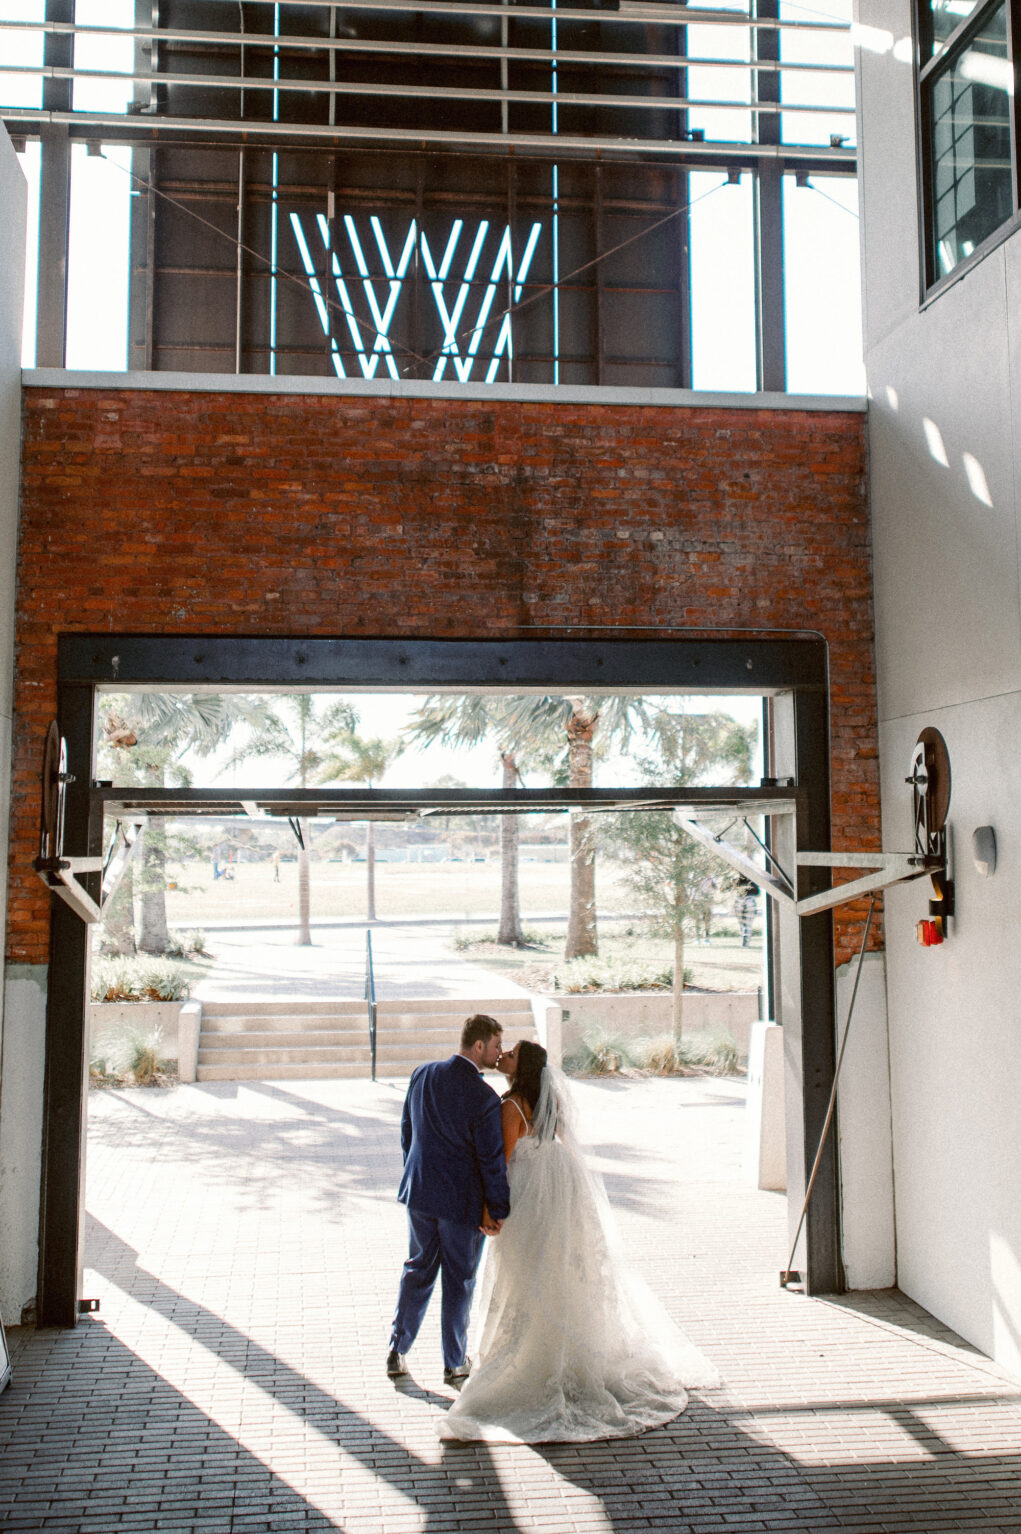 Bride and Groom Wedding Portrait Ideas | Dewitt for Love Photography | Tampa Heights Industrial Wedding Venue Armature Works